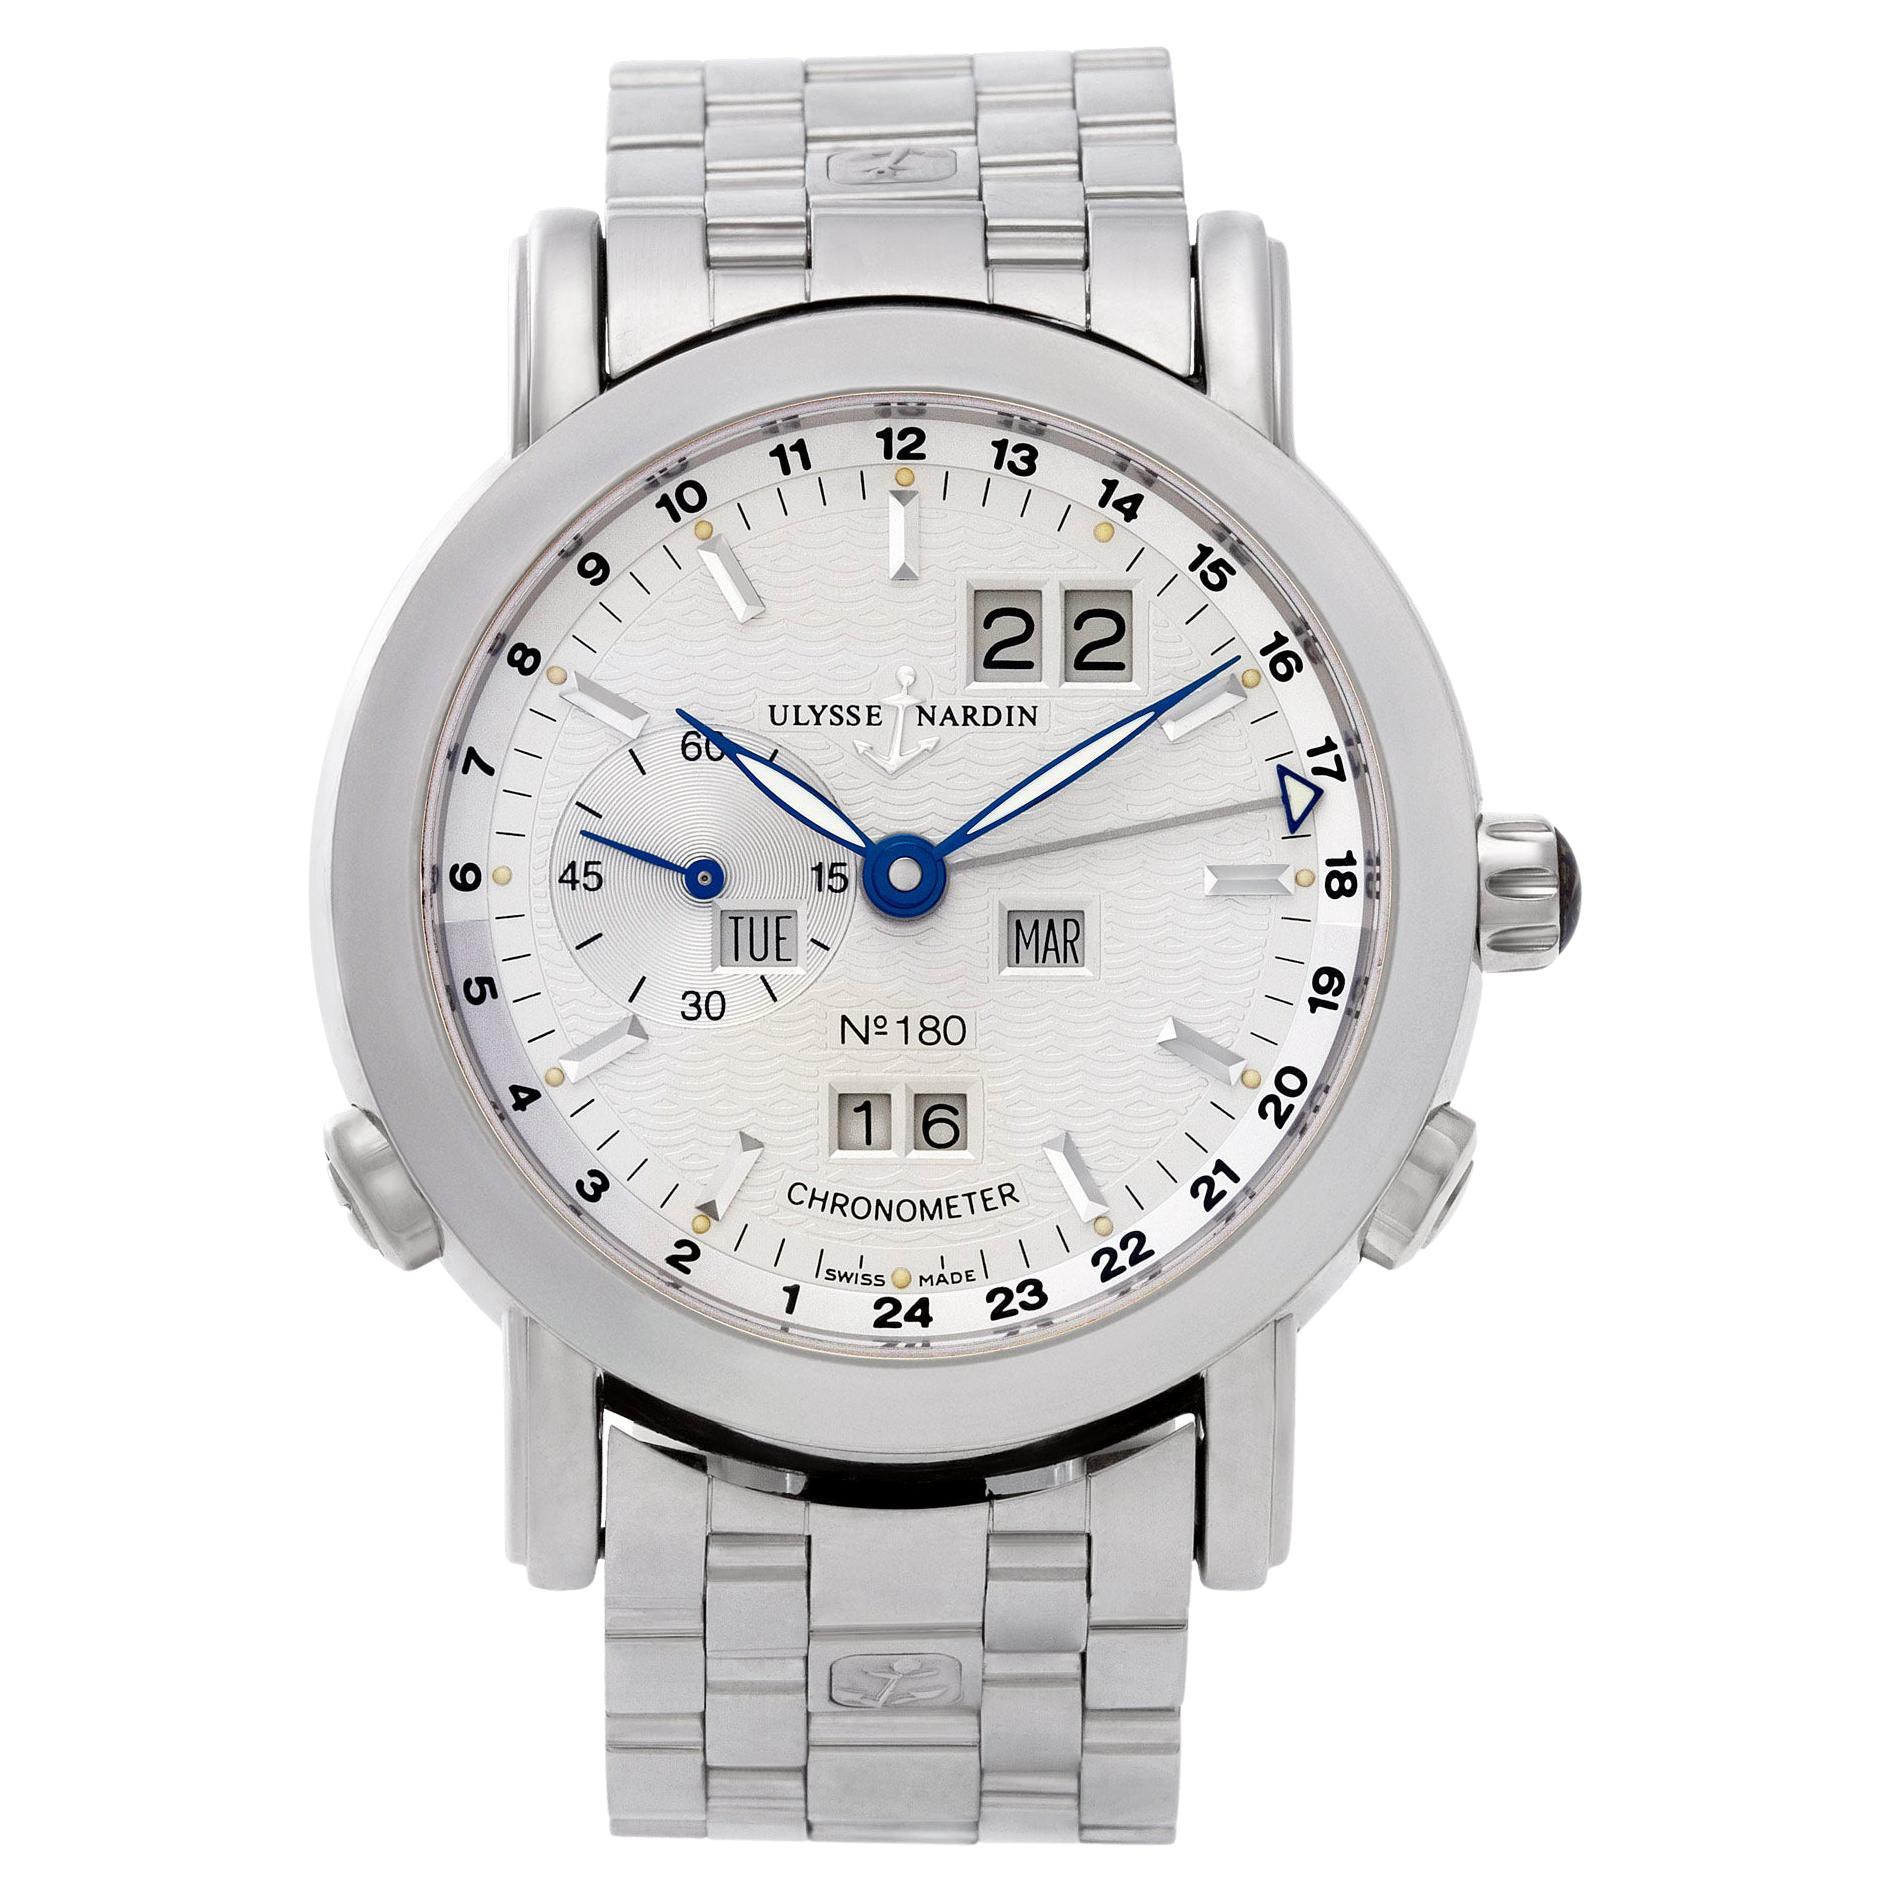 Ulysse Nardin Perpetual Calendar in Platinum Limited Edition of 500 Pieces